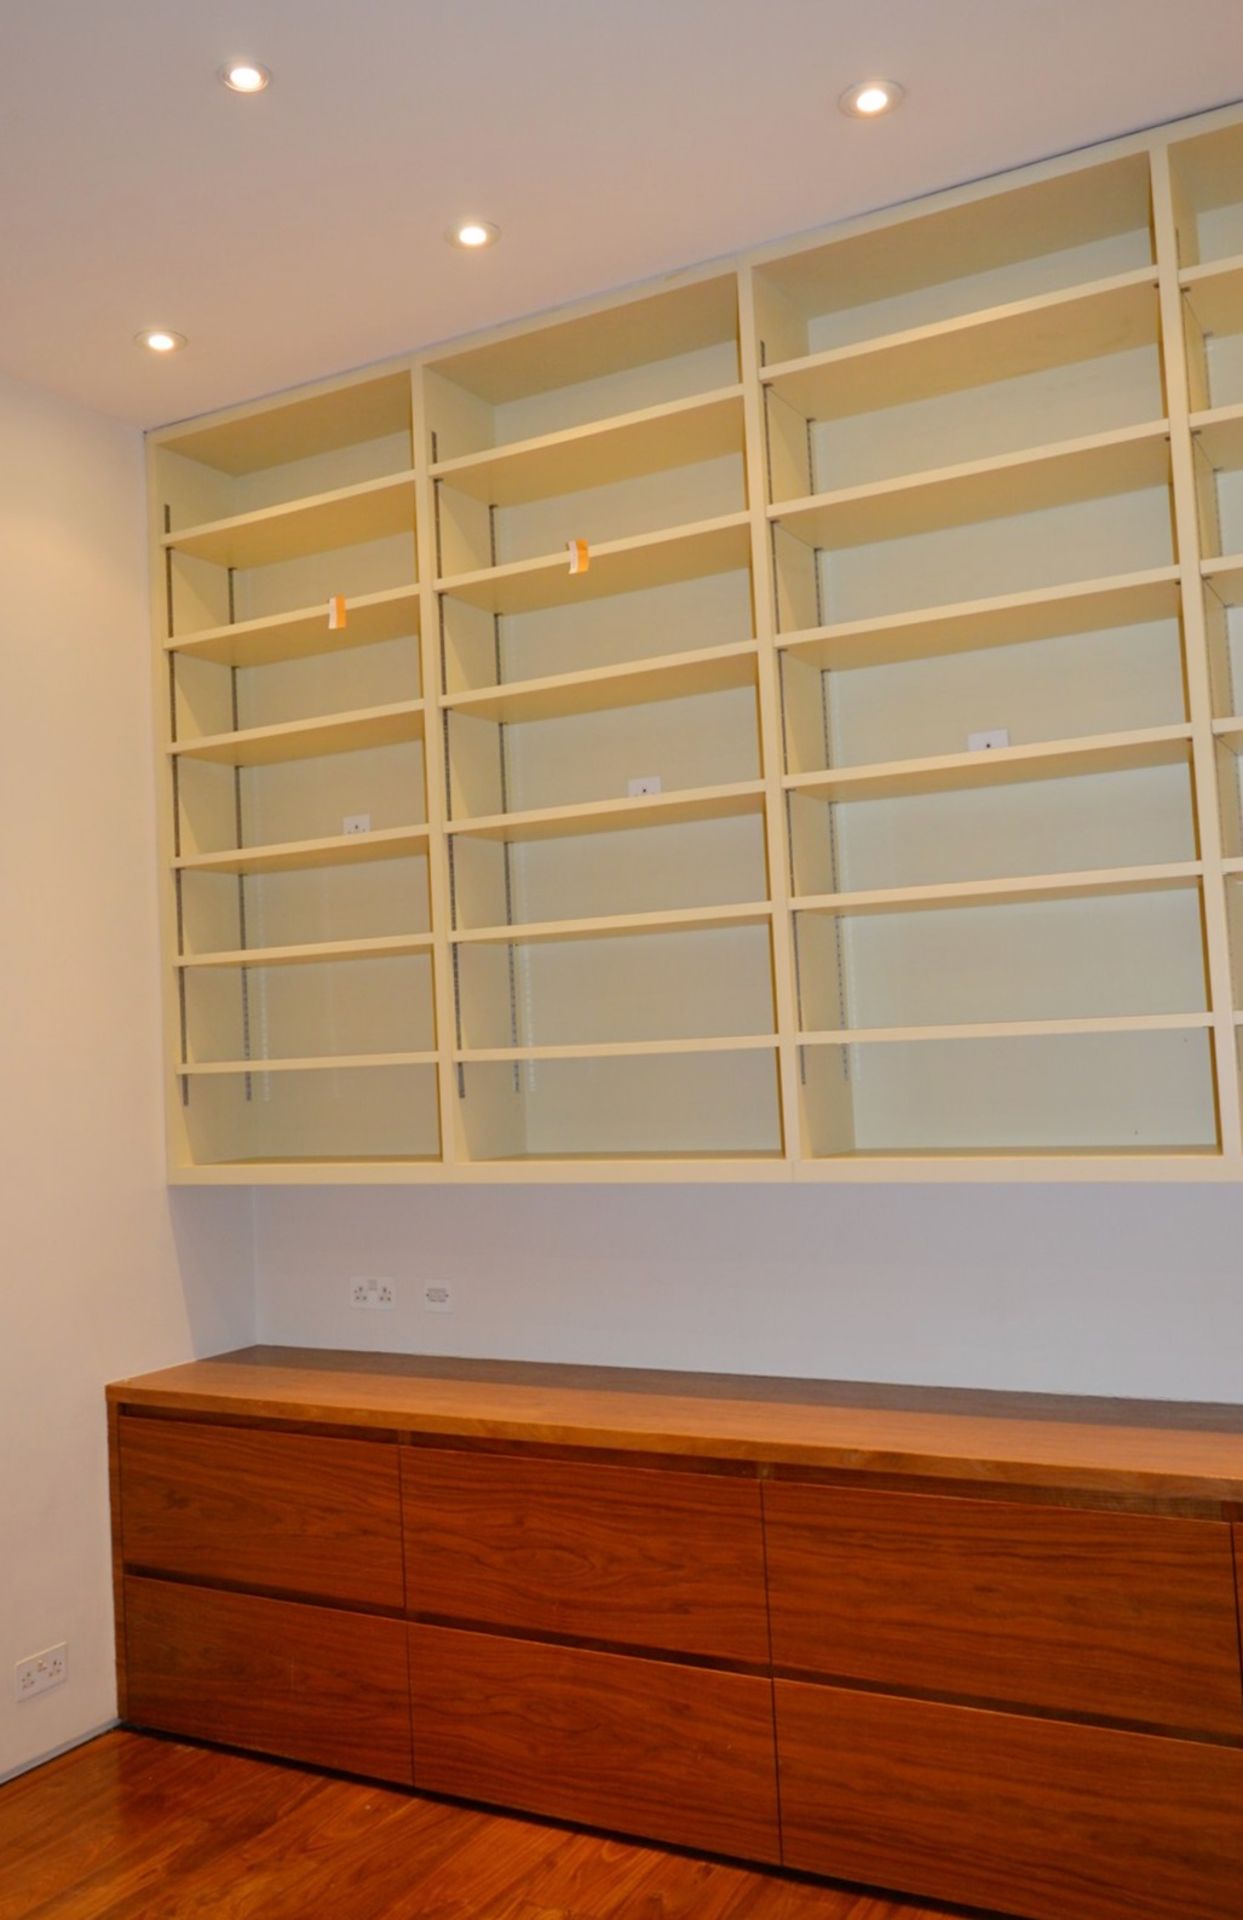 1 x Office Storage Room Including Two Sections of Adjustable Storage Shelvings and Oak Sideboard - Image 11 of 18